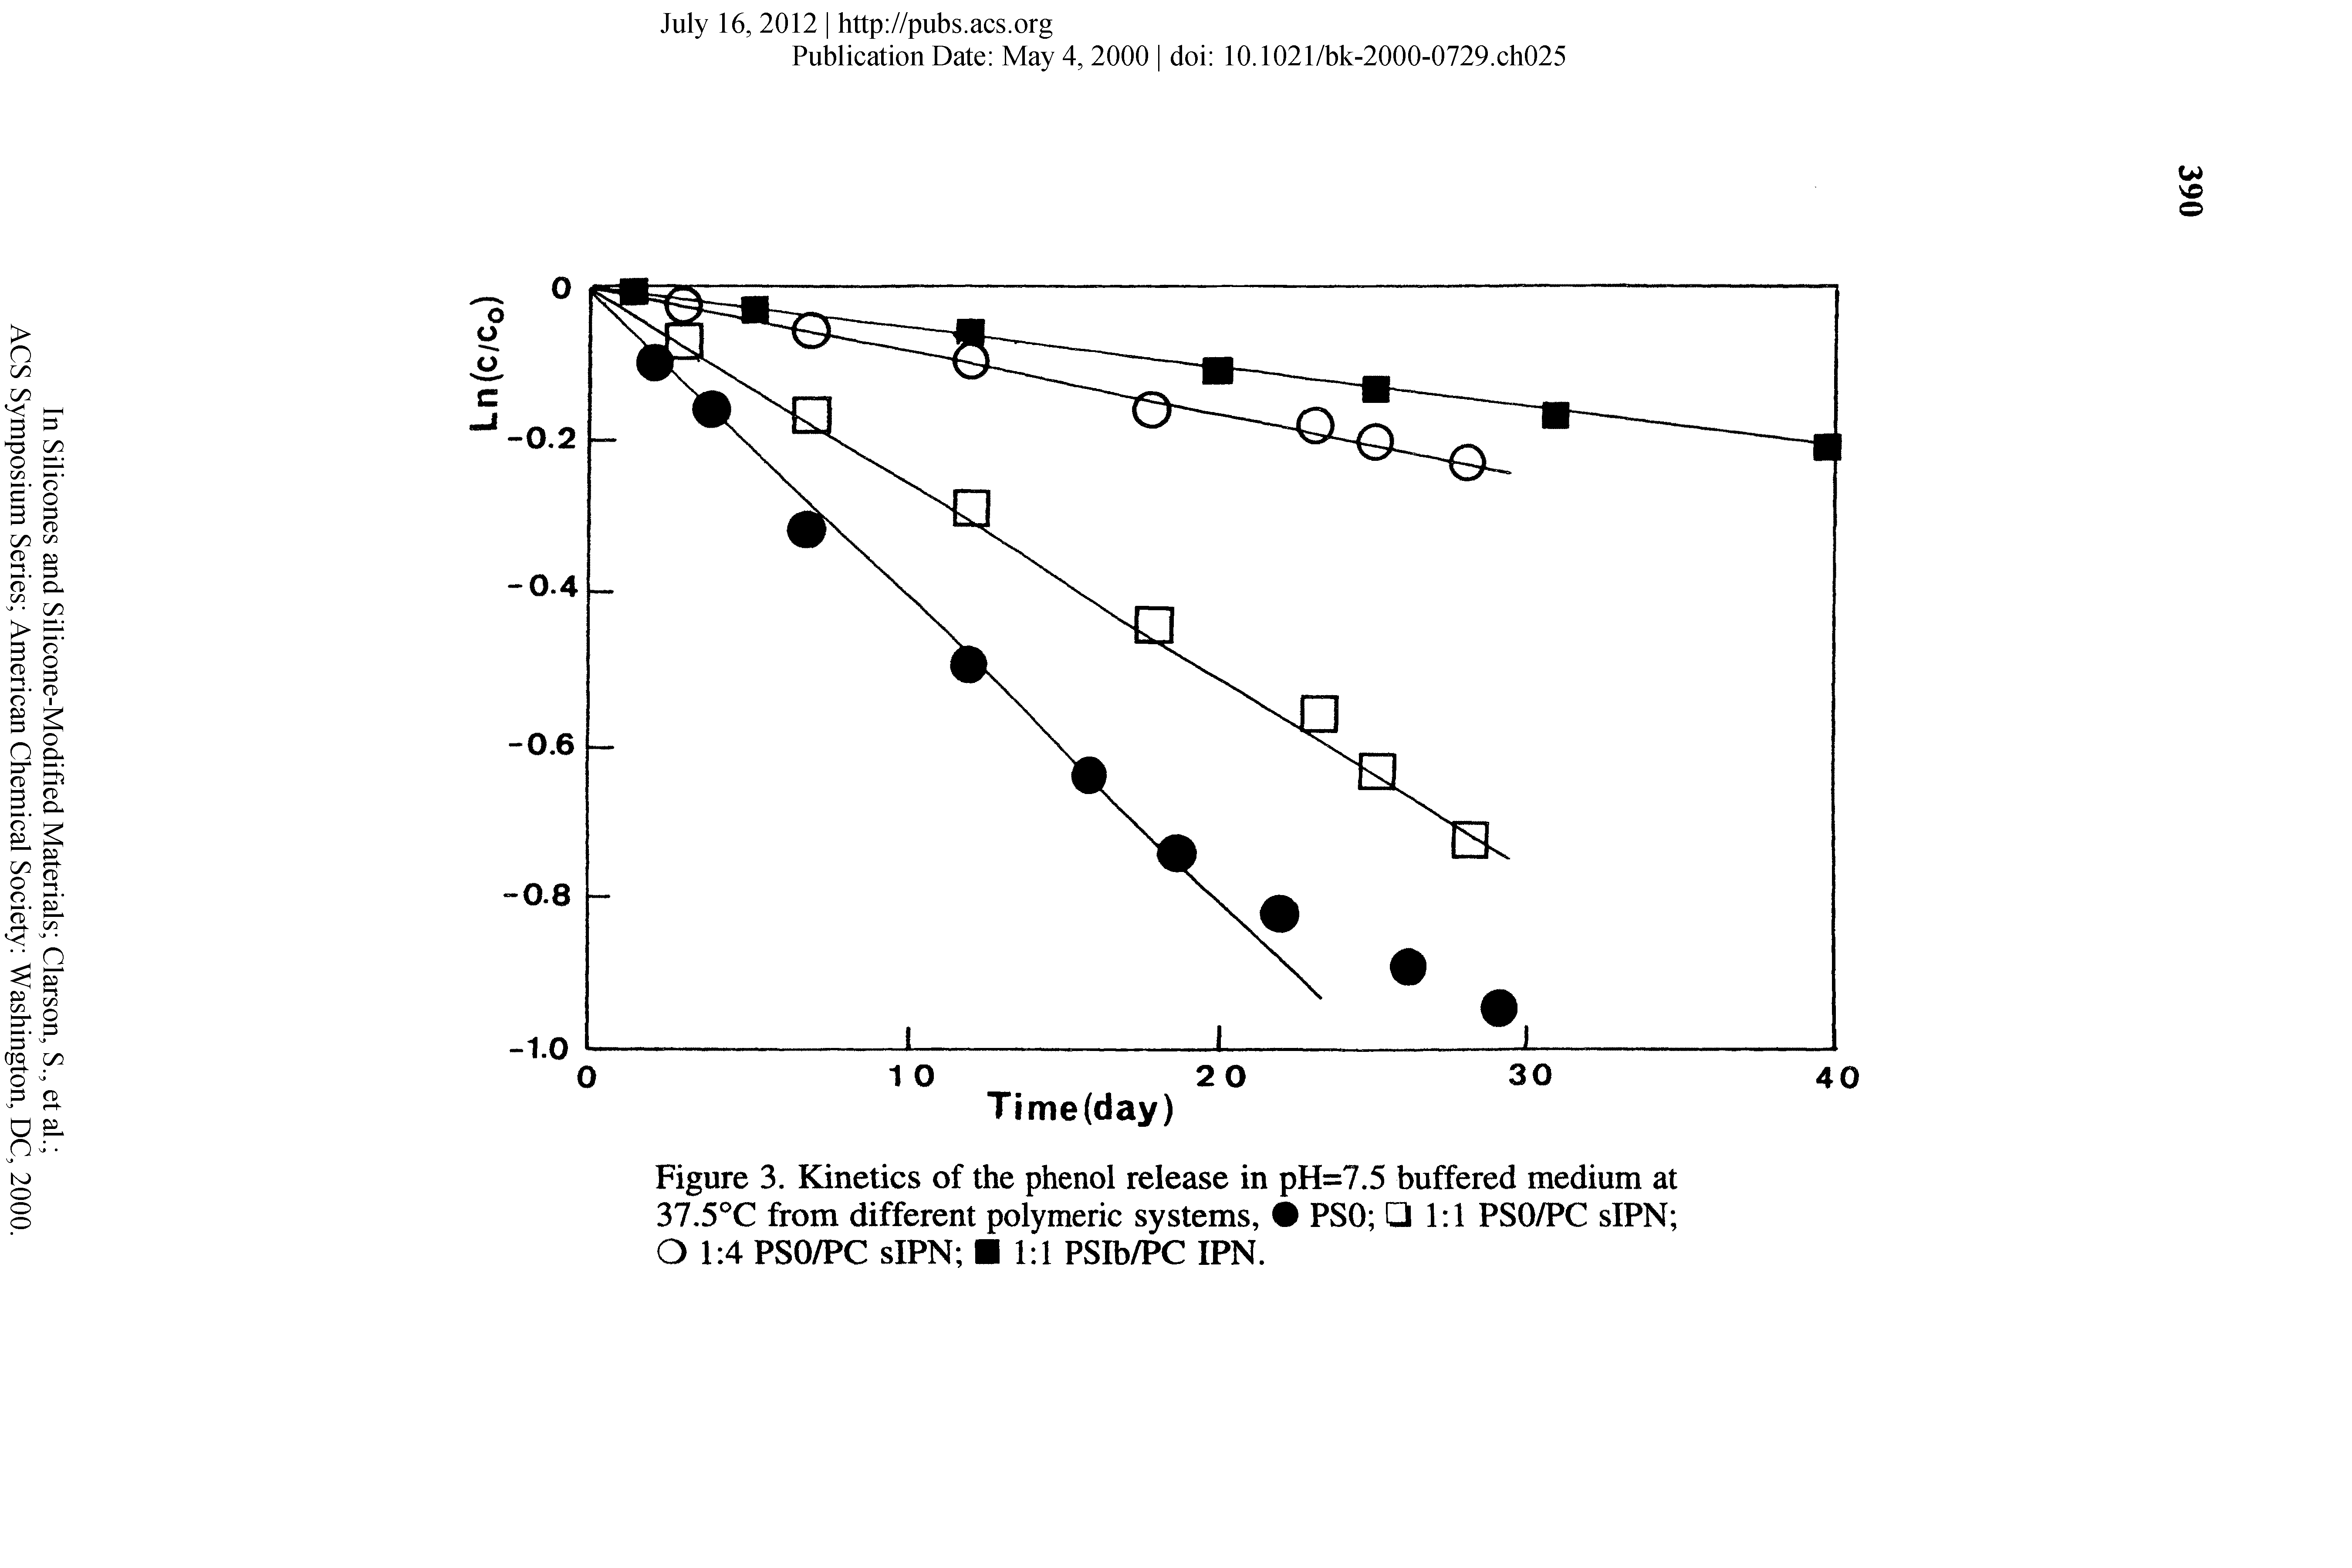 Figure 3. Kinetics of the phenol release in pH=7.5 buffered medium at 37.5°C from different polymeric systems, PSO 1 1 PSO/PC sIPN O 1 4 PSO/PC sIPN Bill PSIb/PC IPN.